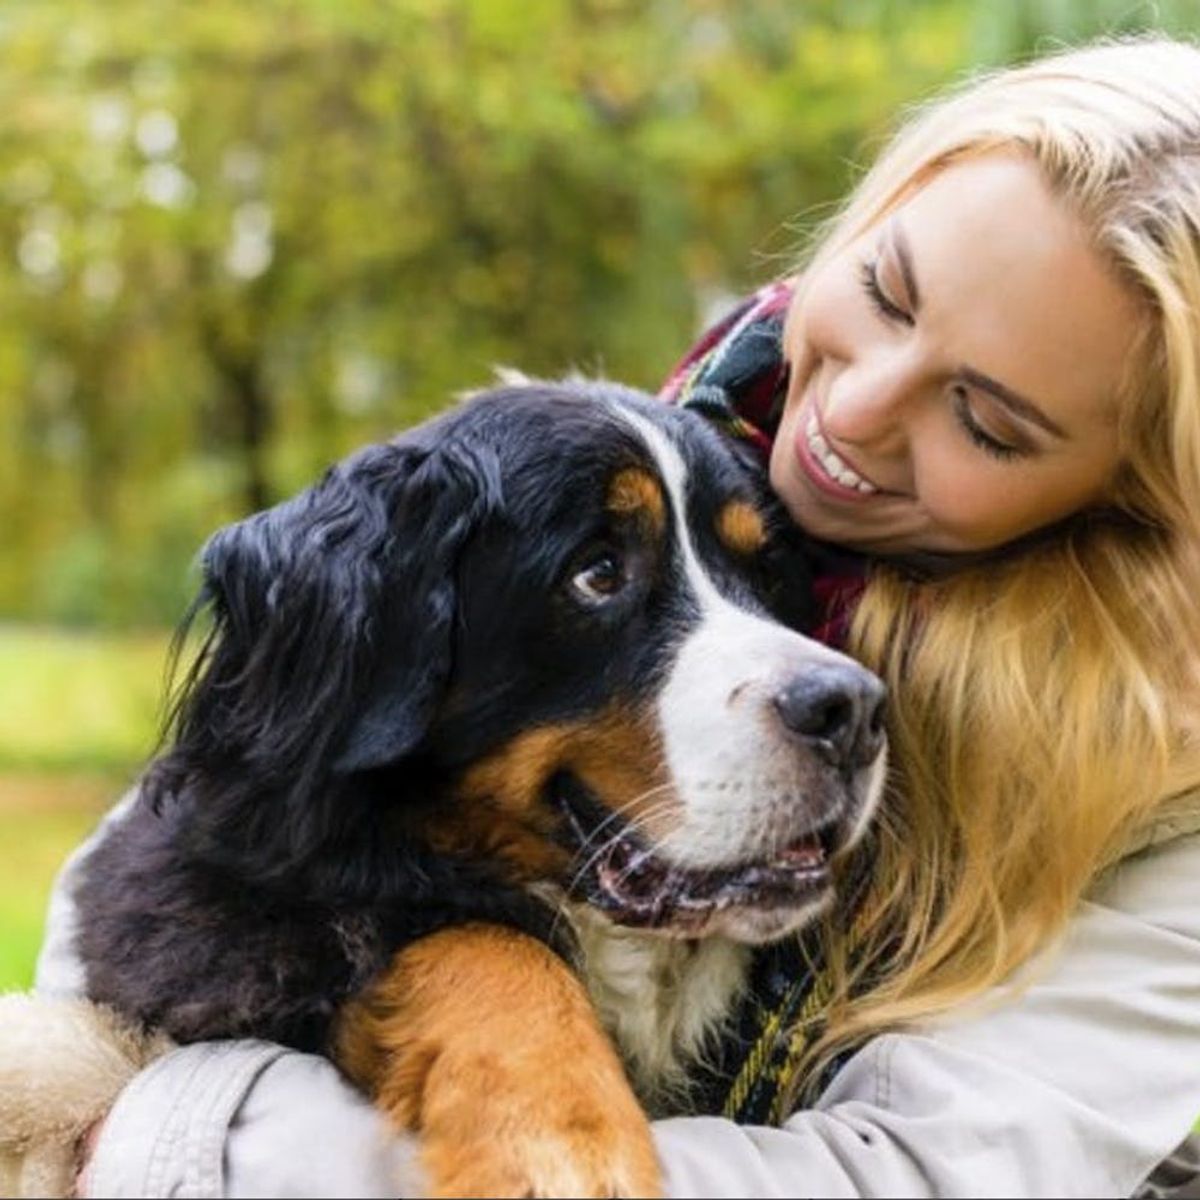 From Parkland to Workplaces: Therapy Pets Could Be the Future of Women’s Mental Health Care